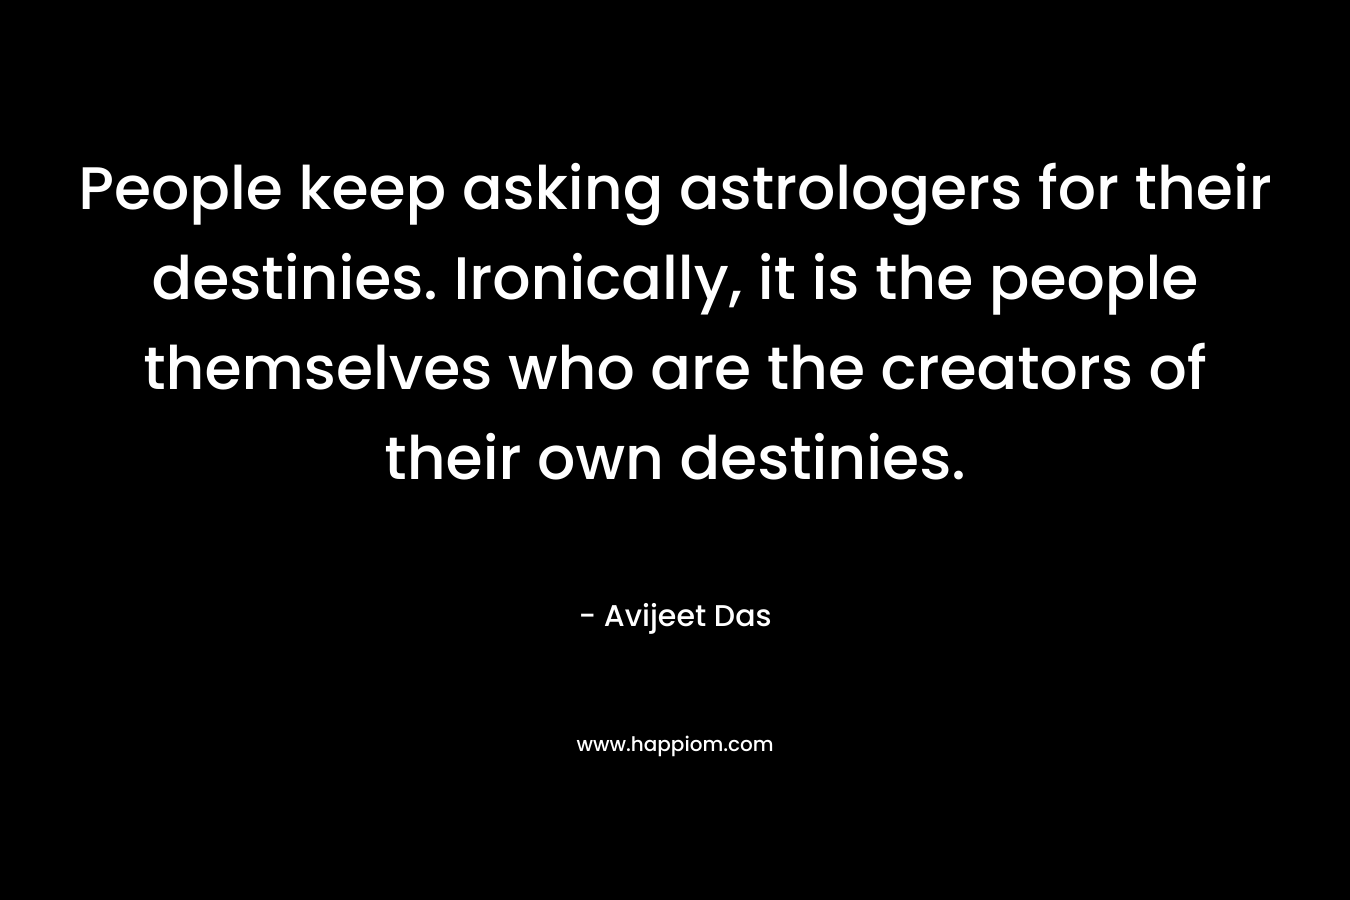 People keep asking astrologers for their destinies. Ironically, it is the people themselves who are the creators of their own destinies.